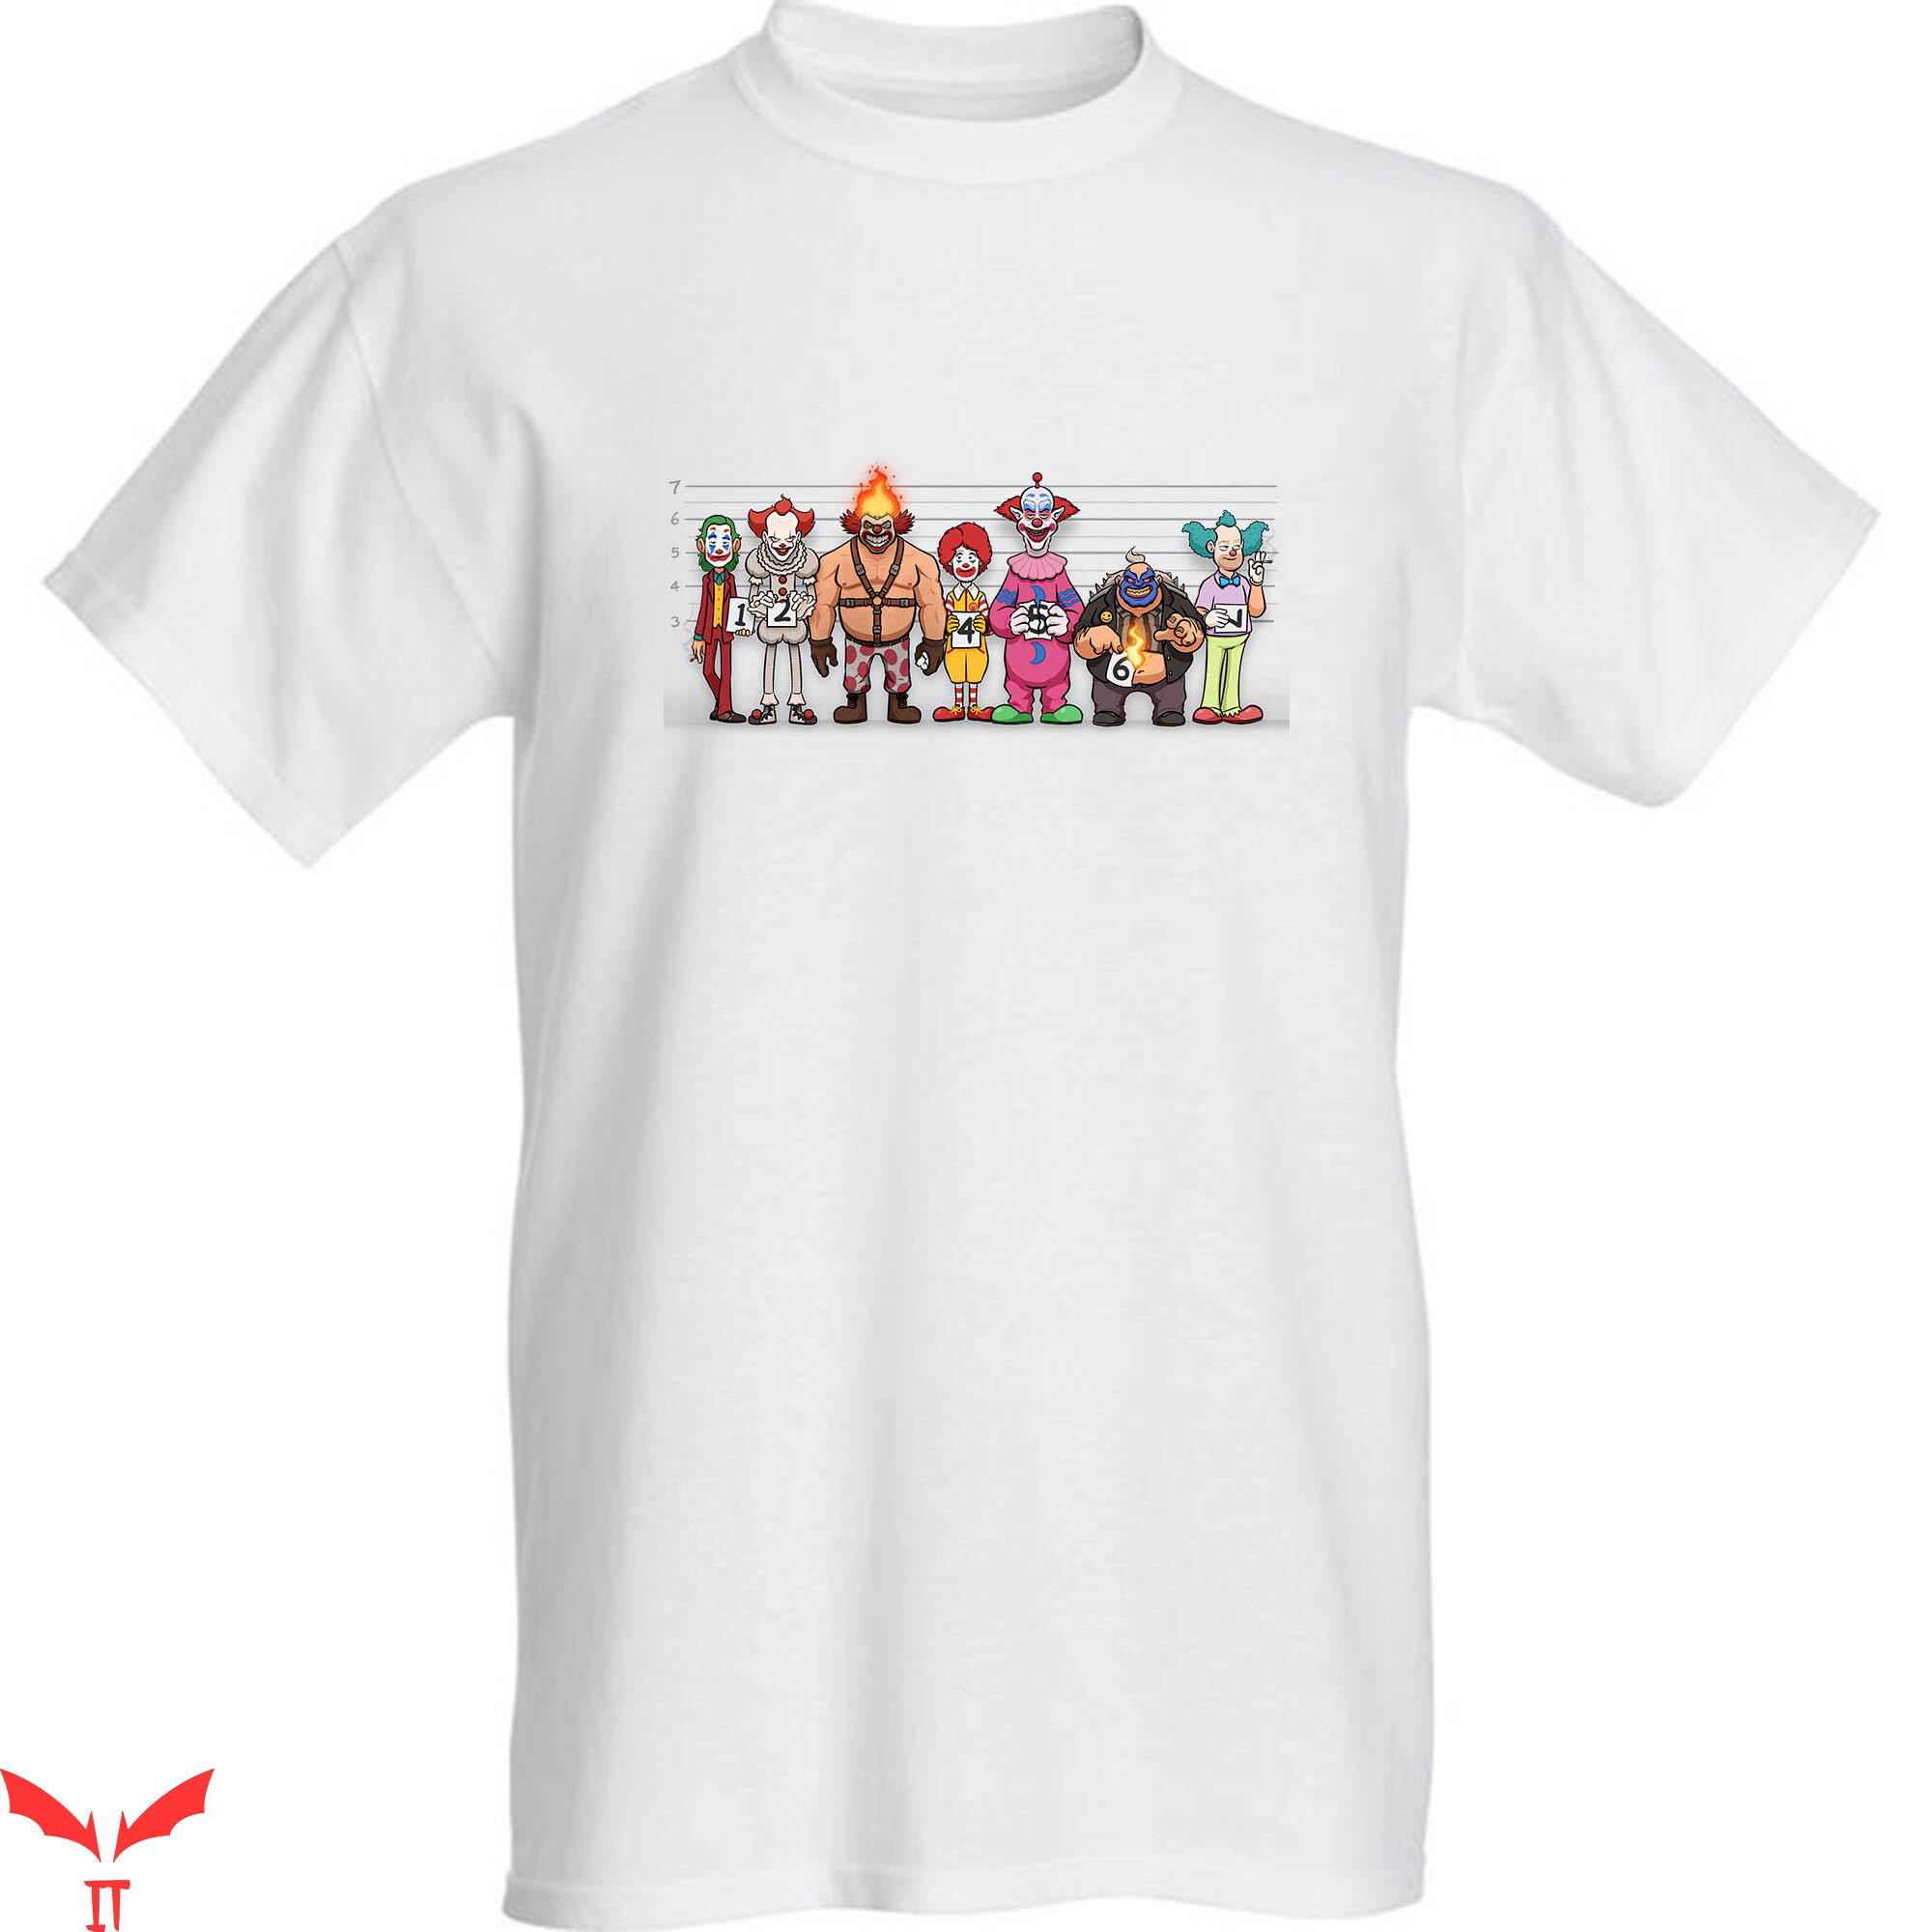 IT Pennywise T-Shirt Killers Halloween Horror Characters